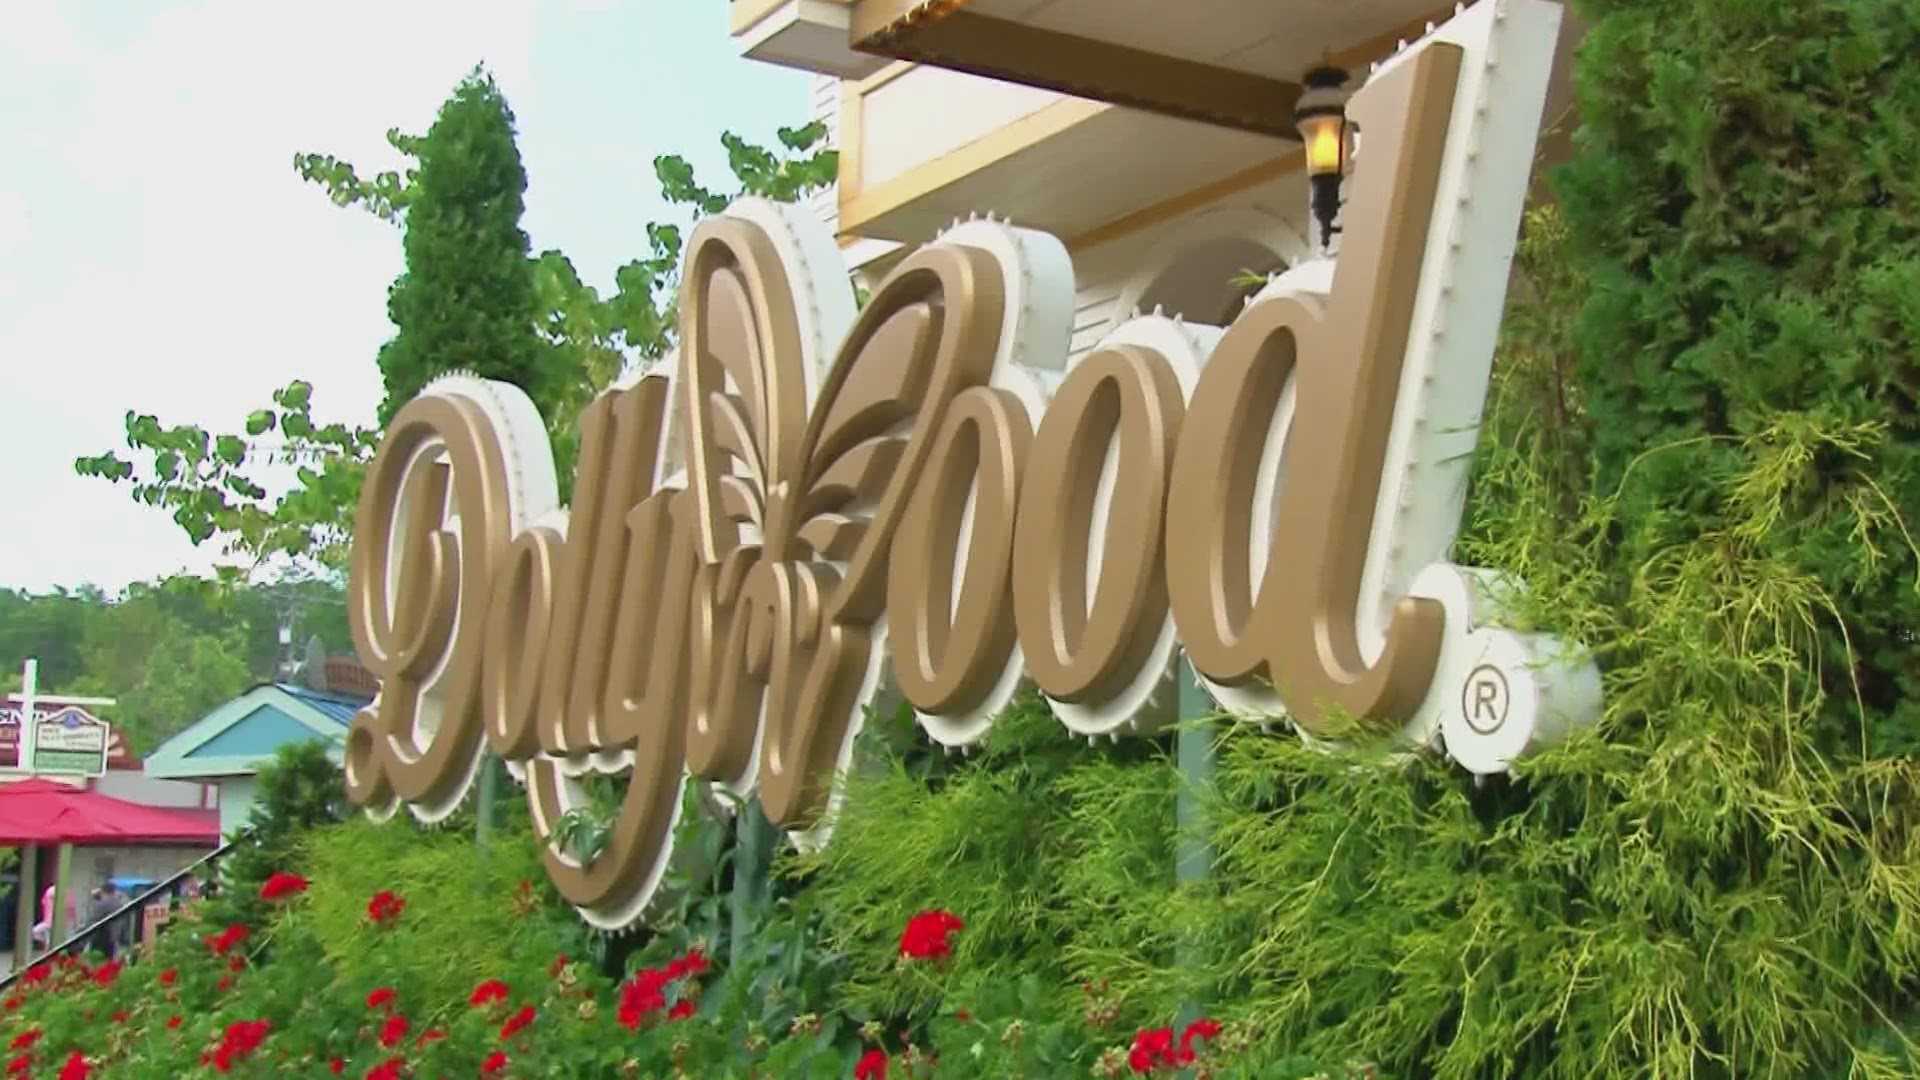 Dollywood is announcing plans to partially reopen!